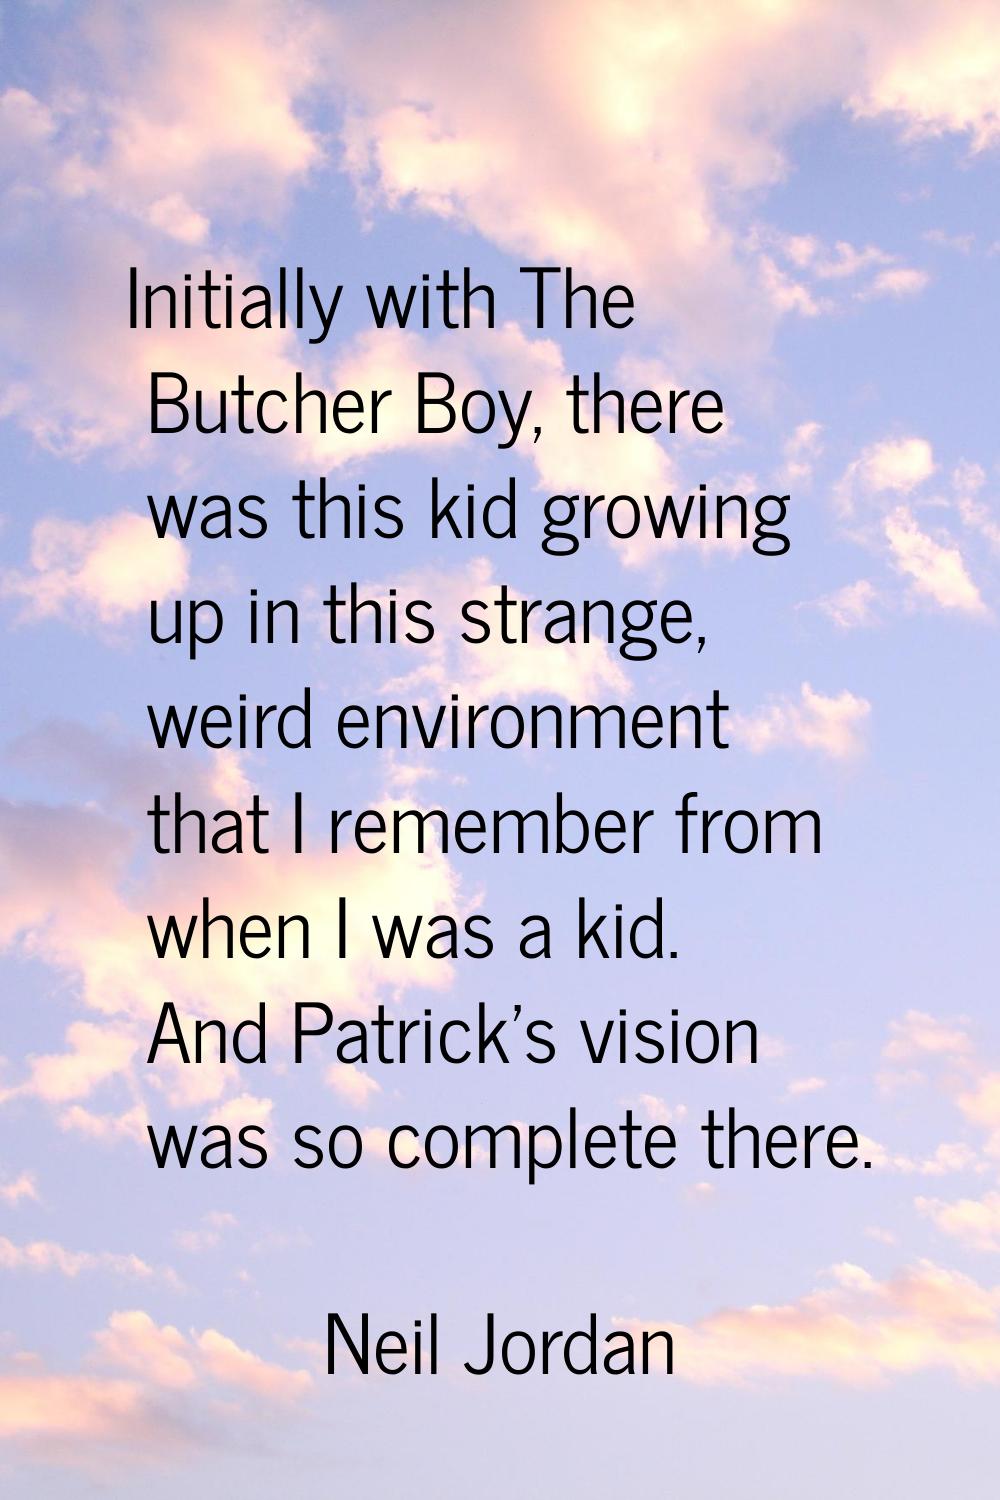 Initially with The Butcher Boy, there was this kid growing up in this strange, weird environment th